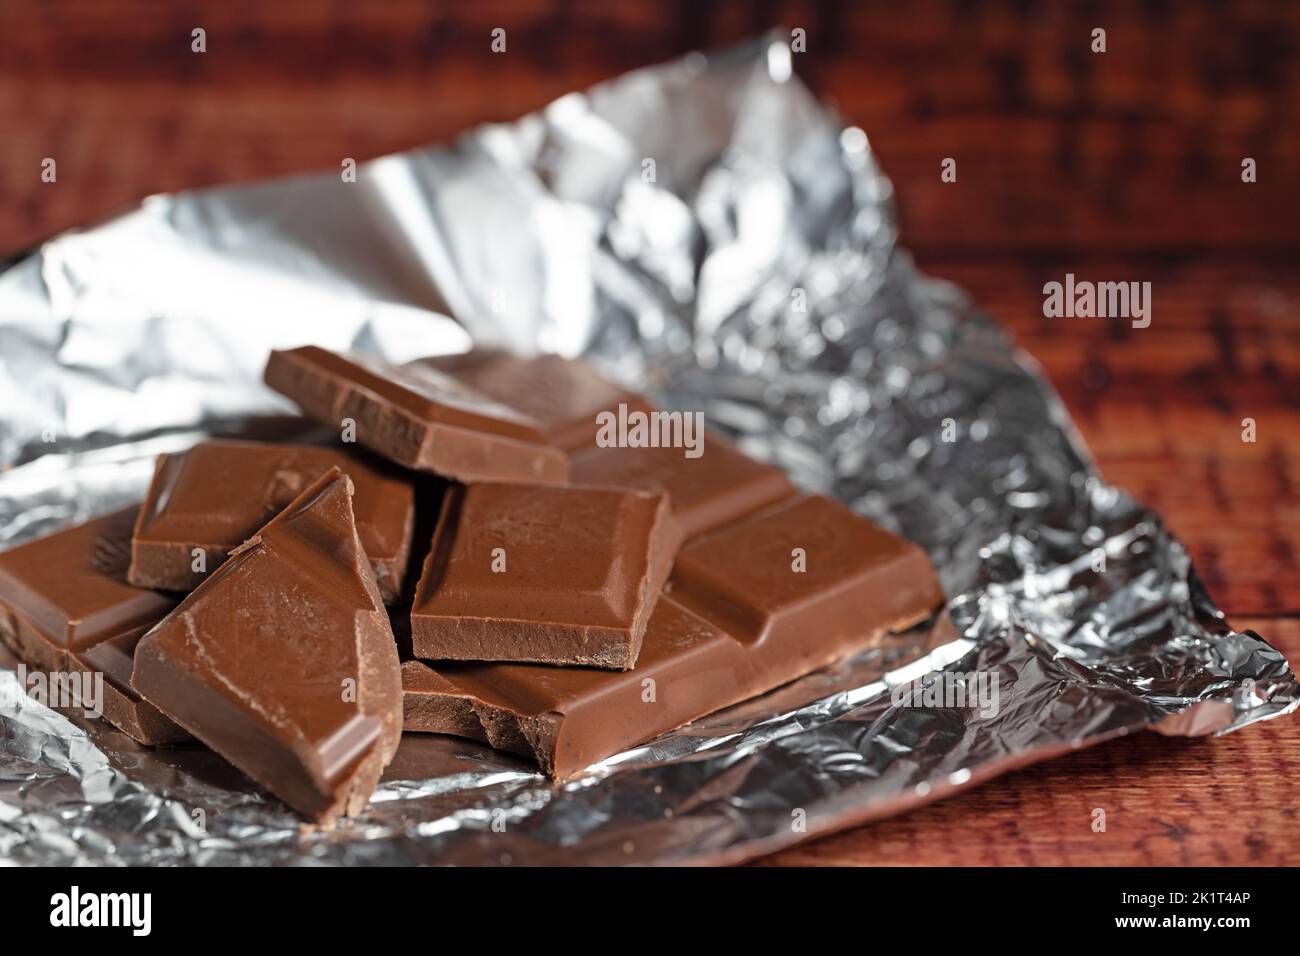 Chocolate pieces on silver paper Stock Photo